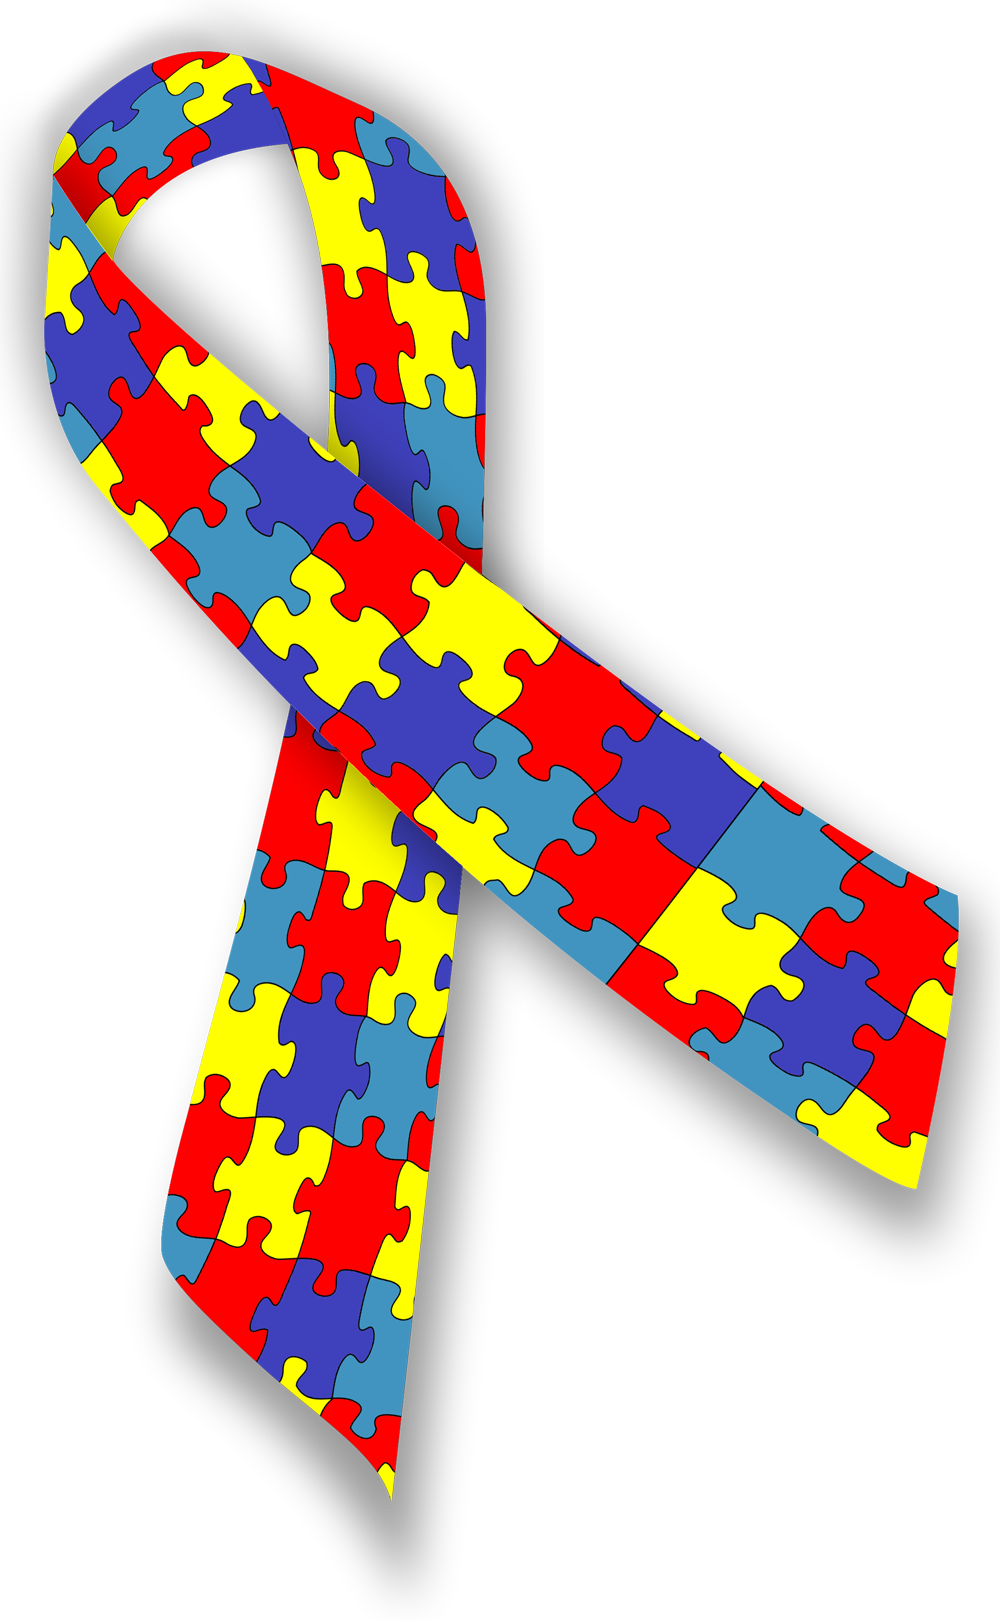 what-causes-autism-and-why-are-more-and-more-kids-being-diagnosed-with-it-national-center-for